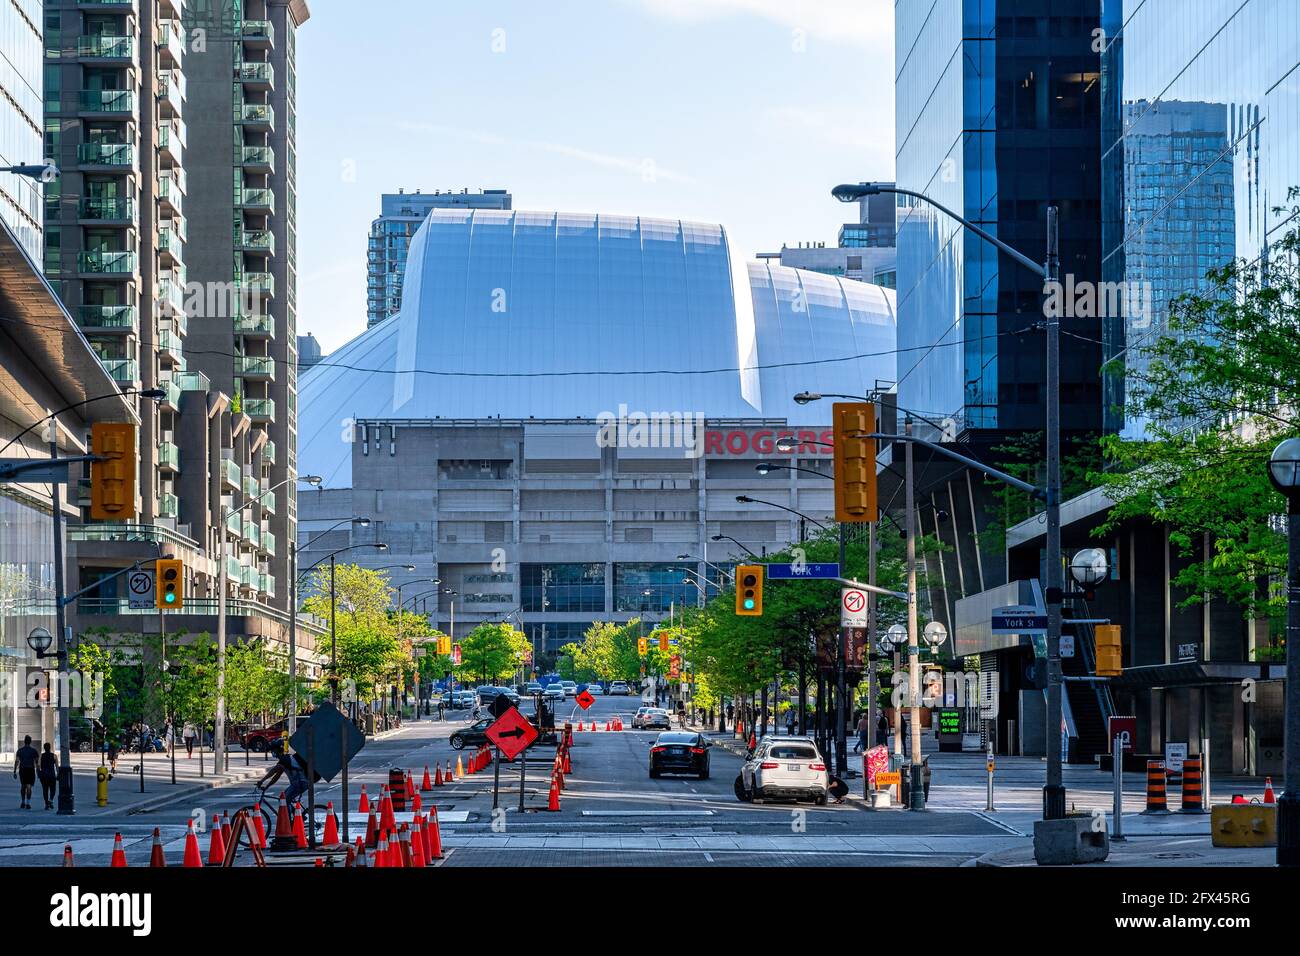 The Rogers Centre Stadium seen from Bremner Boulevard in the downtown district of Toronto, Canada Stock Photo